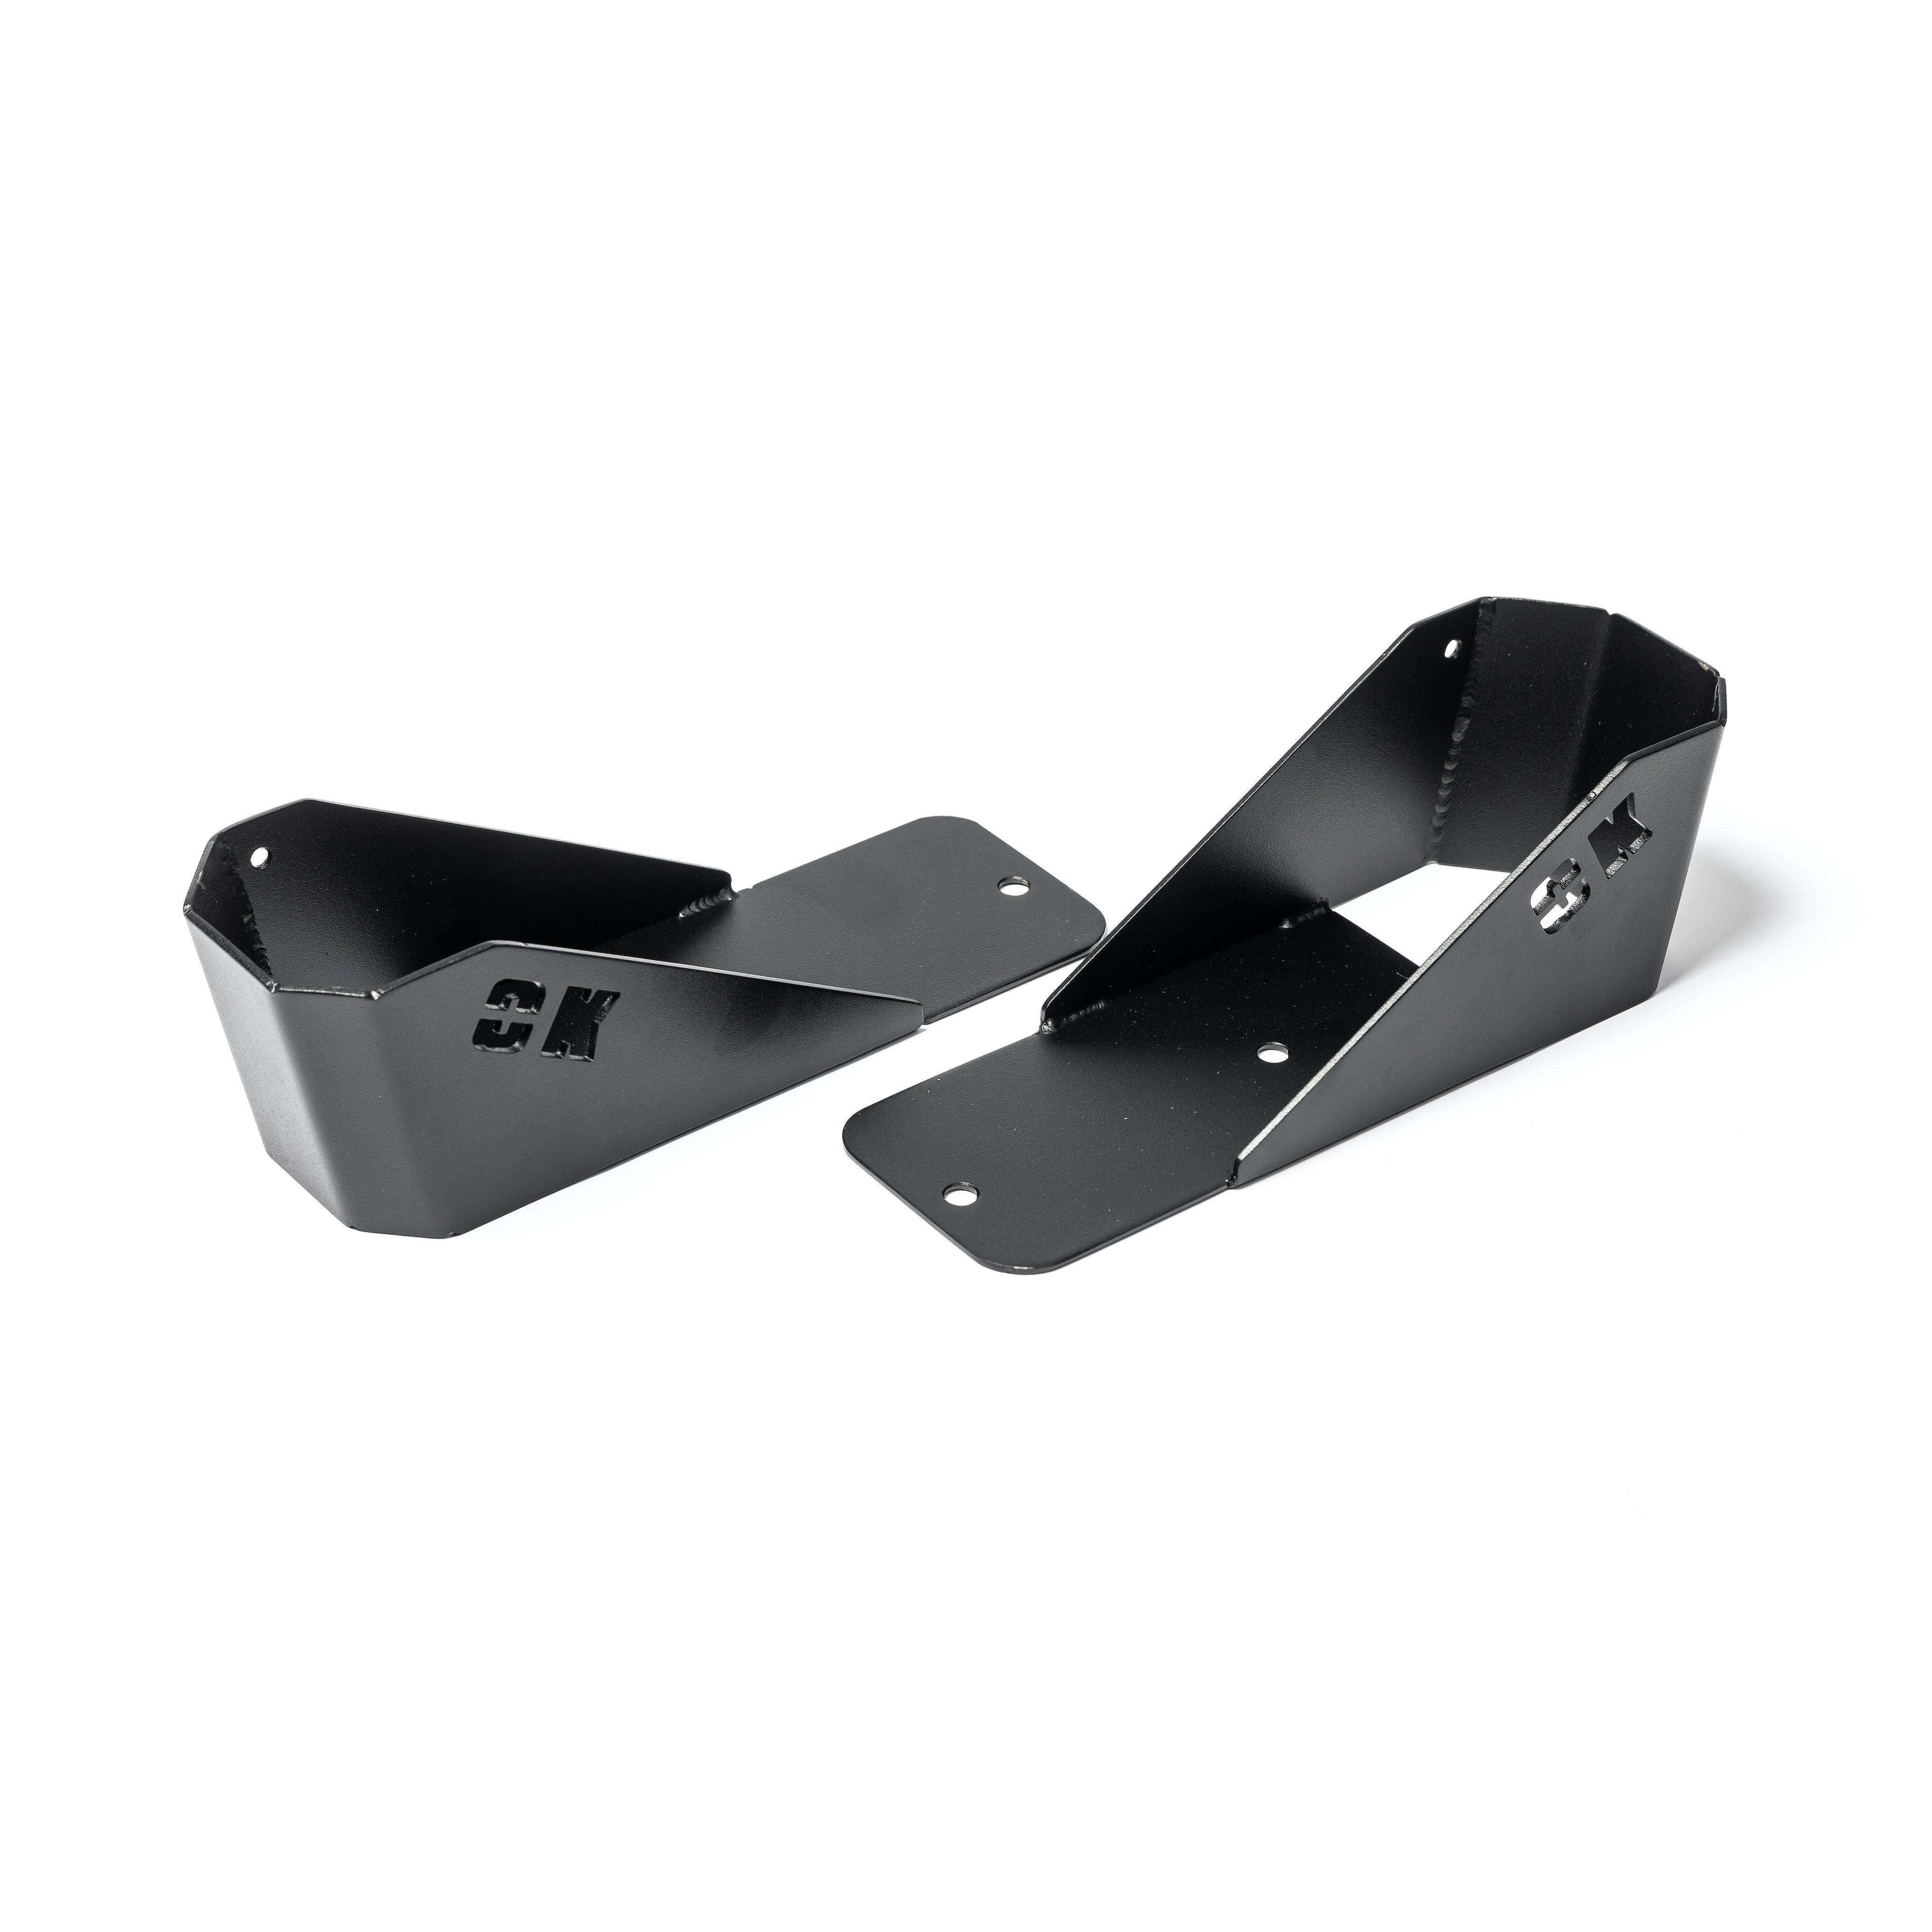 Ram 2500 Outback Kitters Rear Shock Guards - Outback Kitters